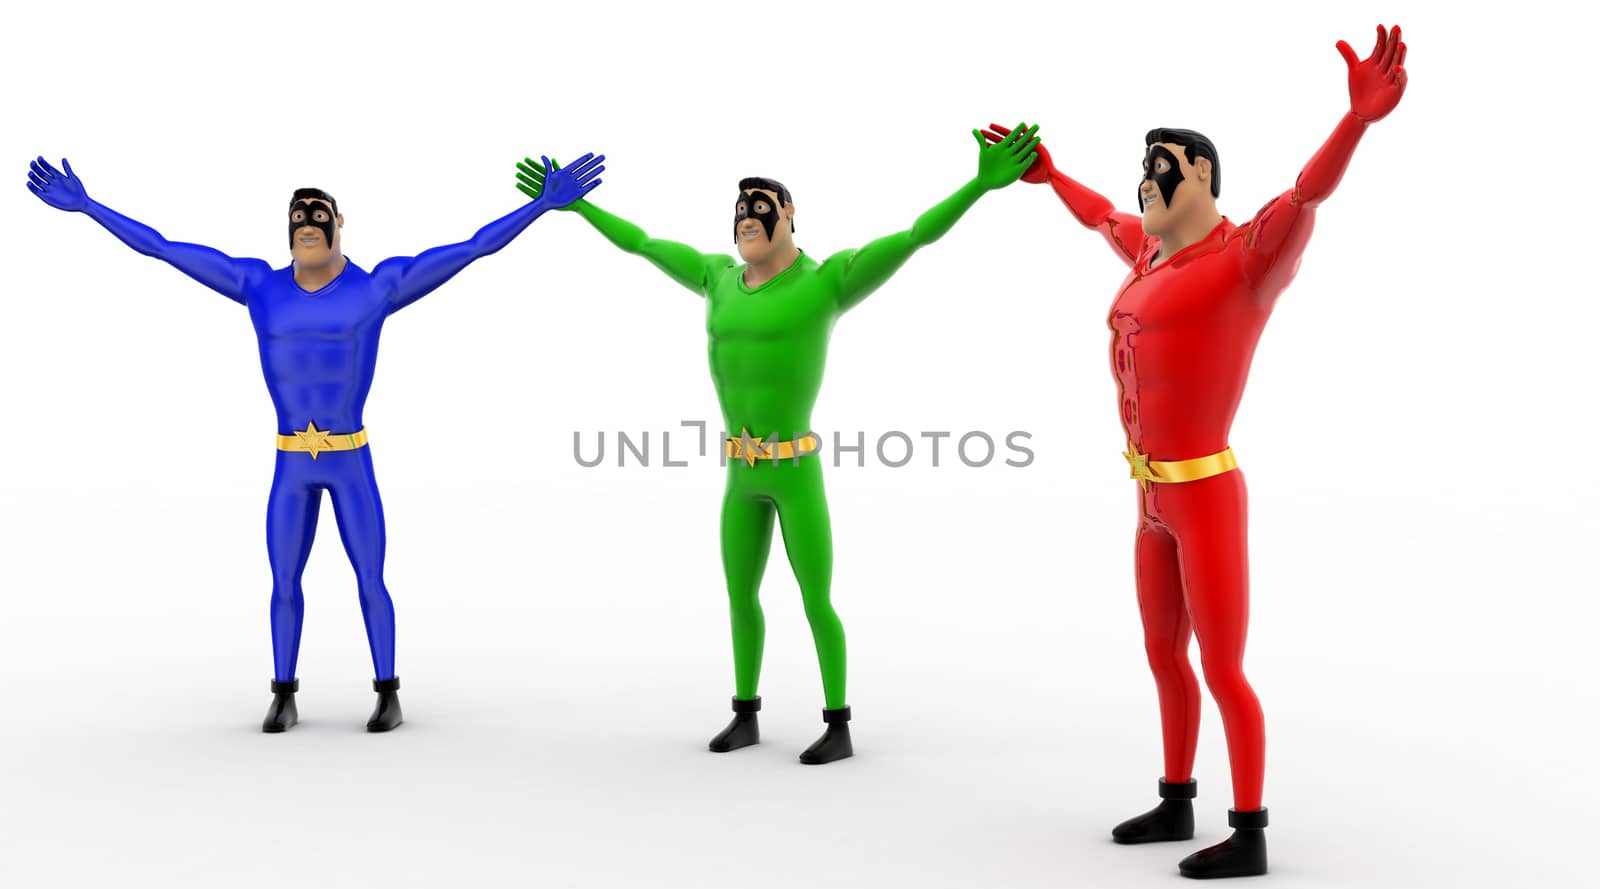 3d three pneguins happy and hands up concept on white background, side angle view